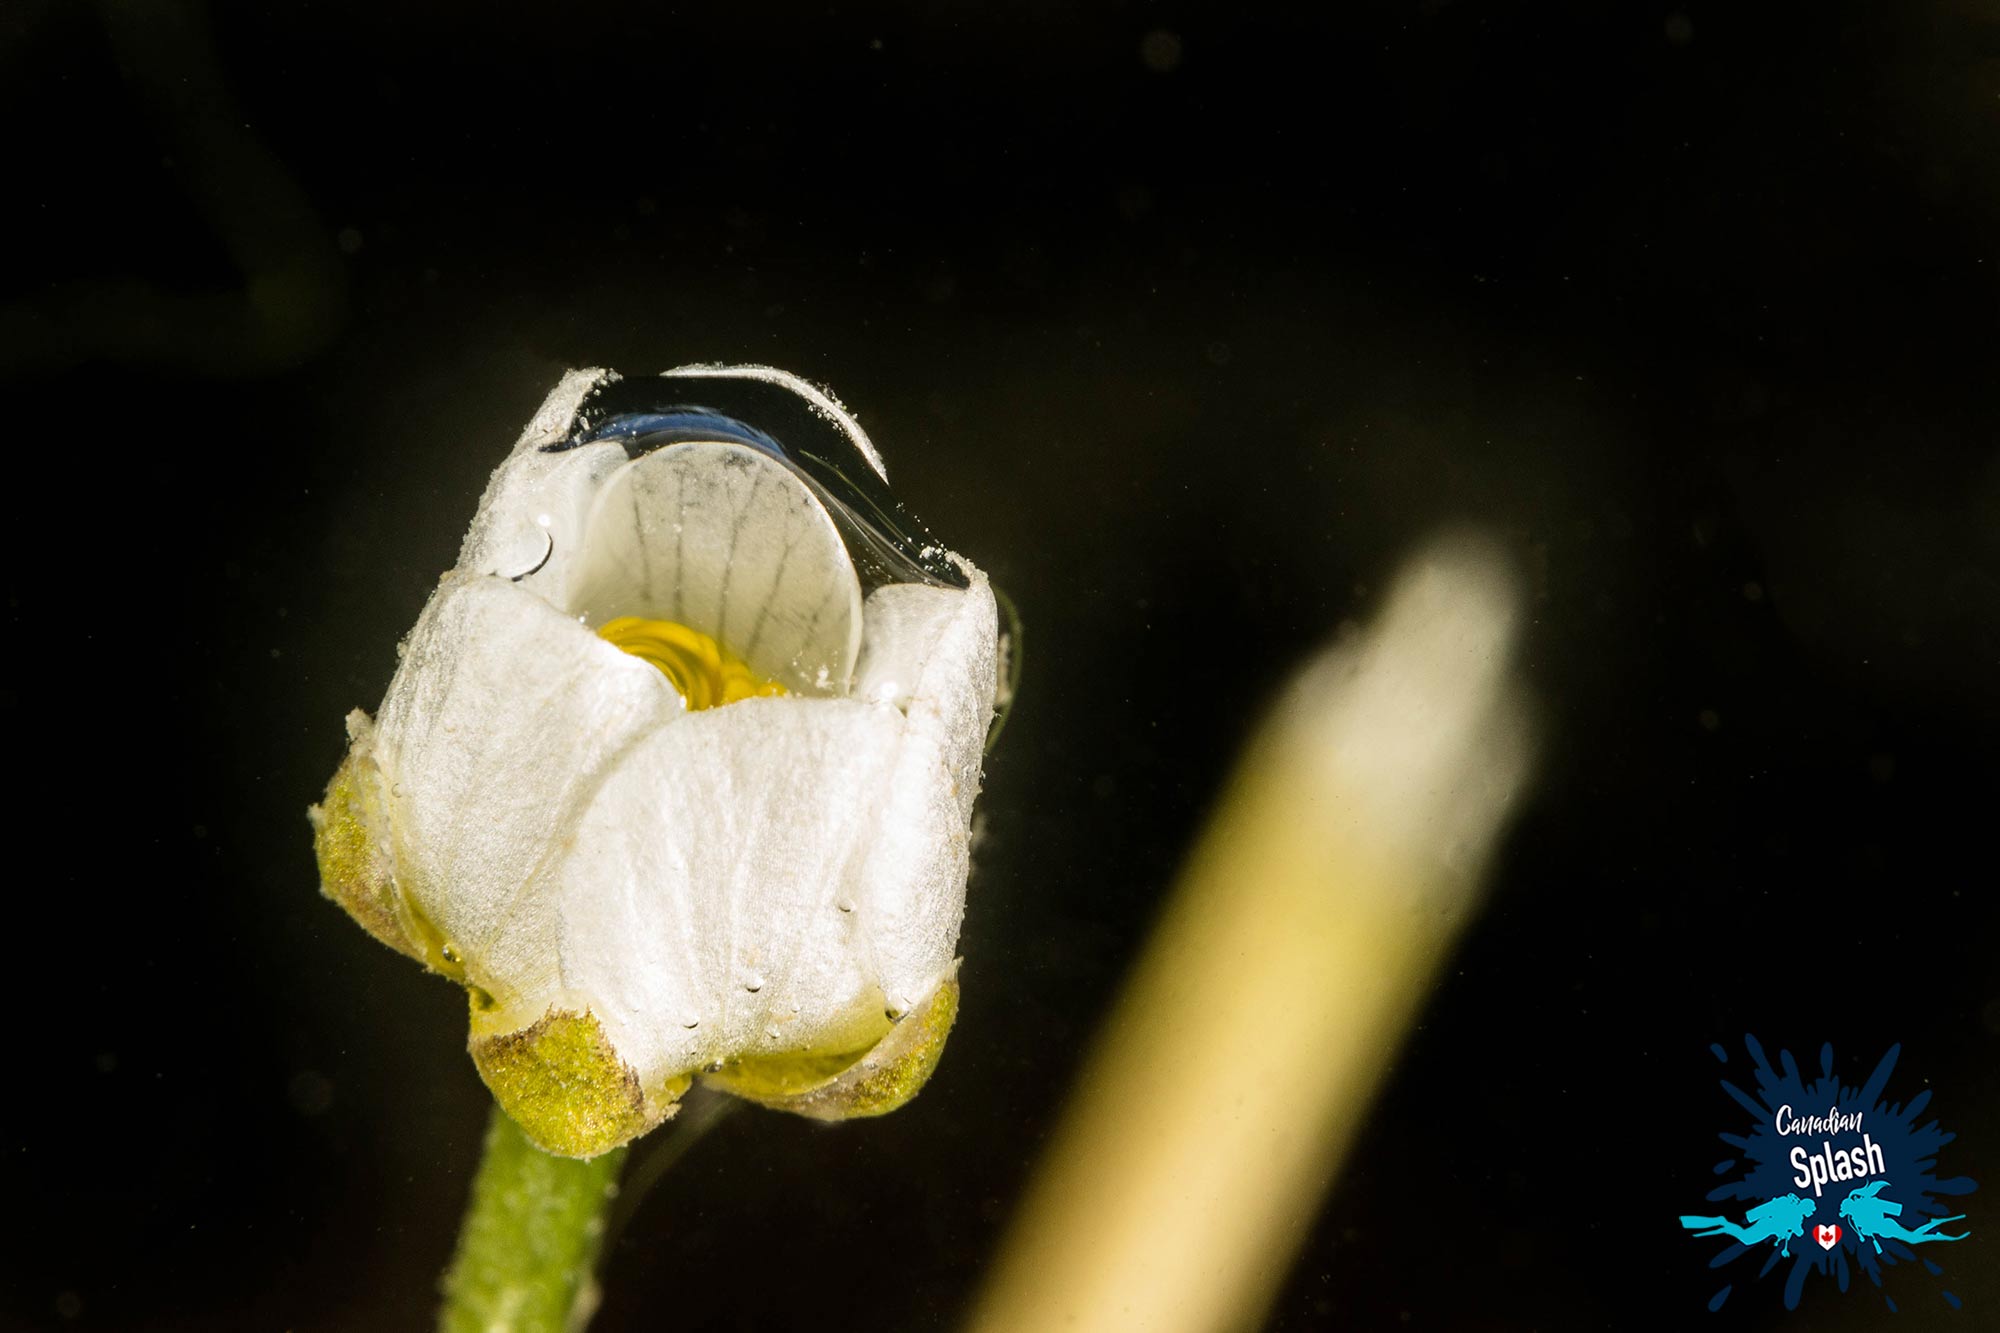 Small White Aquatic Flower With An Air Bubble In The Petals At The Base Of The Diefenbaker Dam In Saskatchewan, Scuba Canada